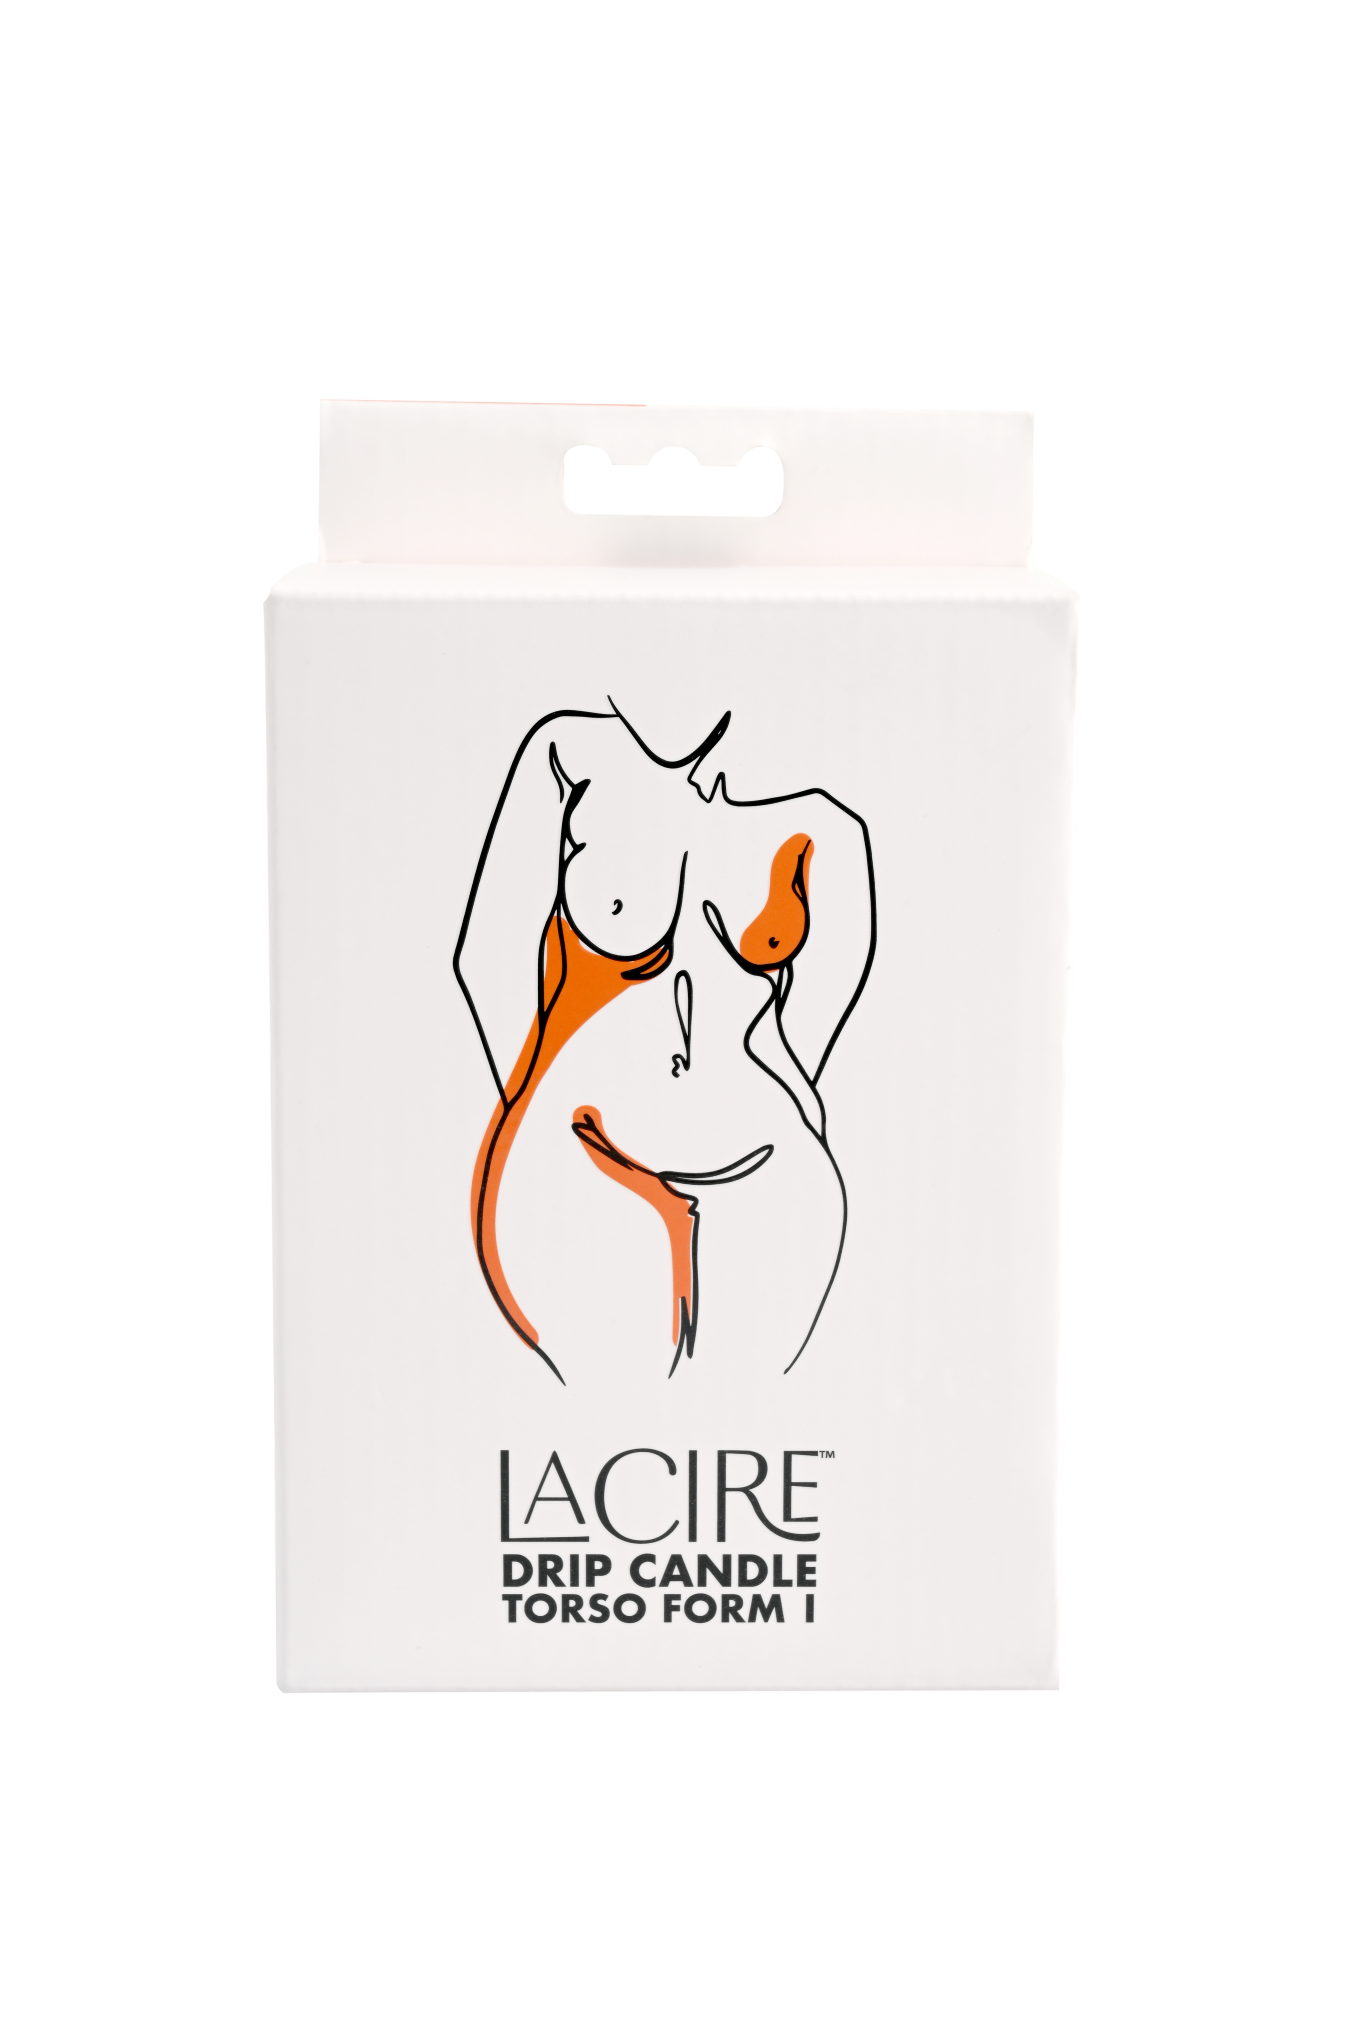 Photo of the front of the box for the LaCire Torso Candle from Sportsheets (form 1/orange).